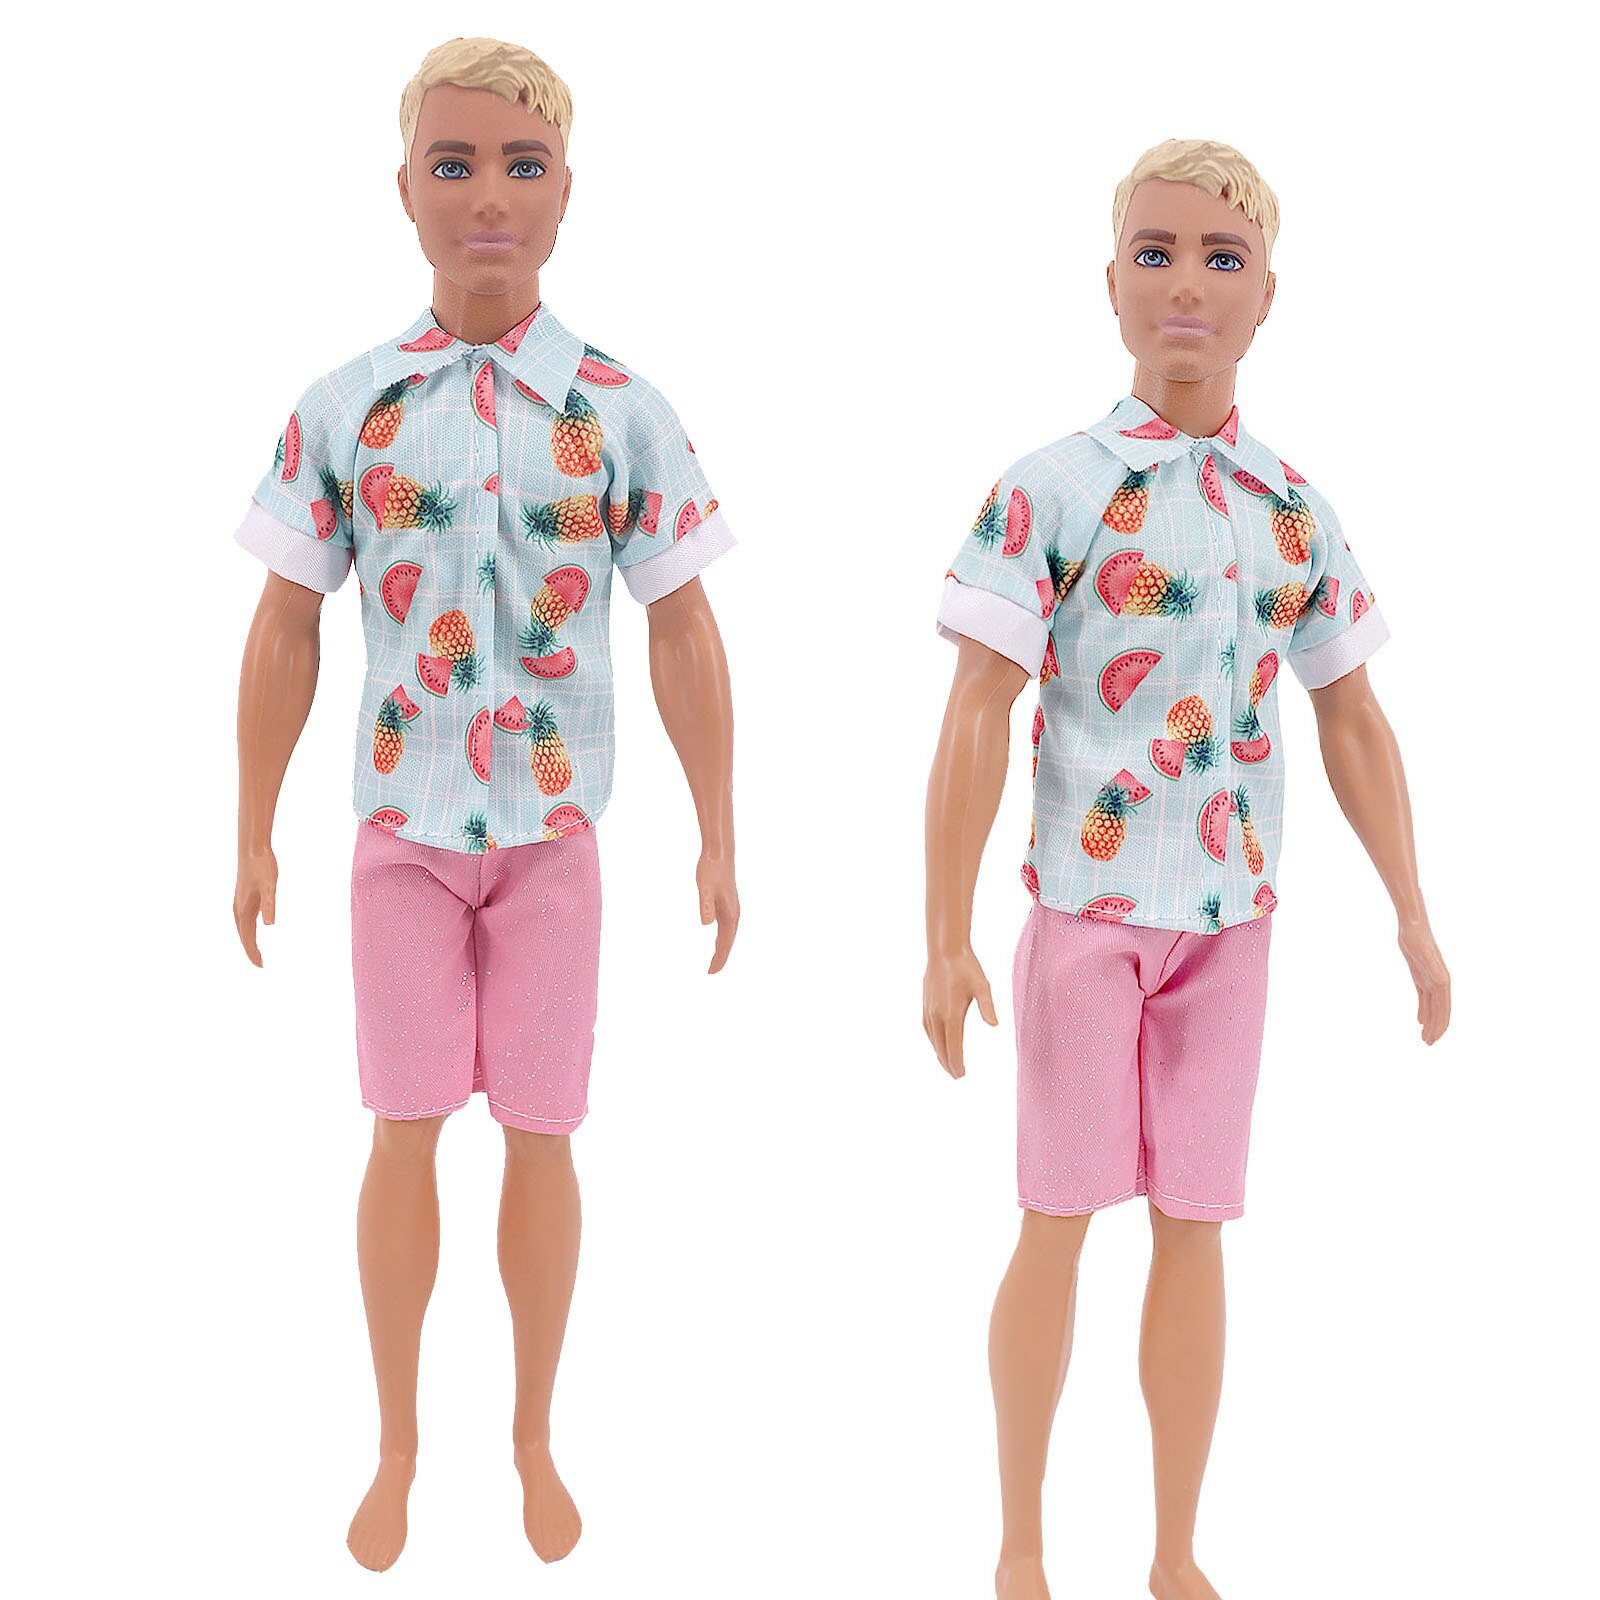 Ken Doll Clothes Doll Daily Wear Casual Suit Sweatshirt Pants Suit Man 11.8  Inch Doll Clothes For 30cm Barbies Doll Accessories